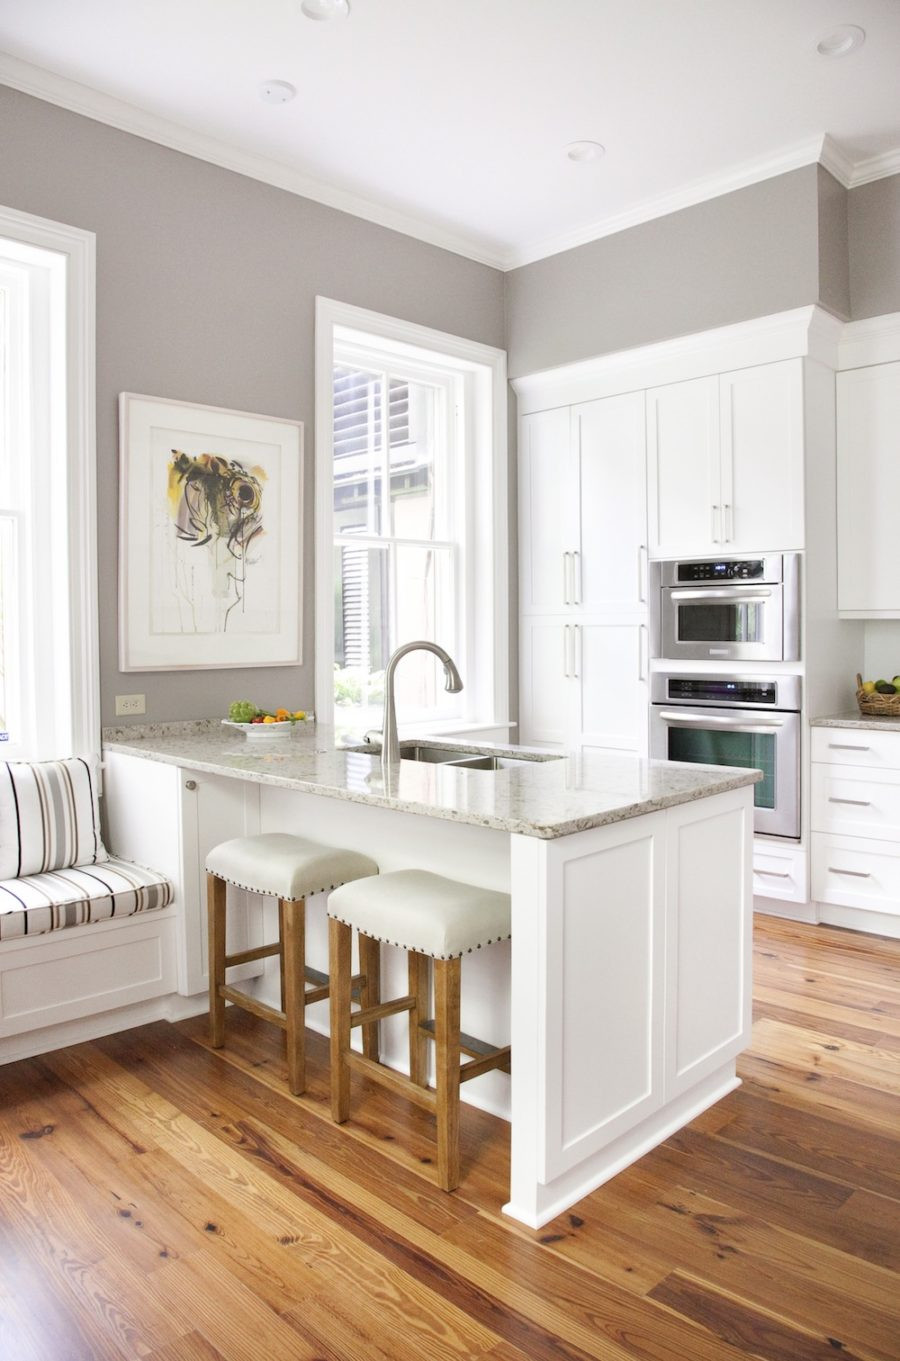 Small Kitchen With Peninsula
 Kitchen Peninsula Designs That Make Cook Rooms Look Amazing